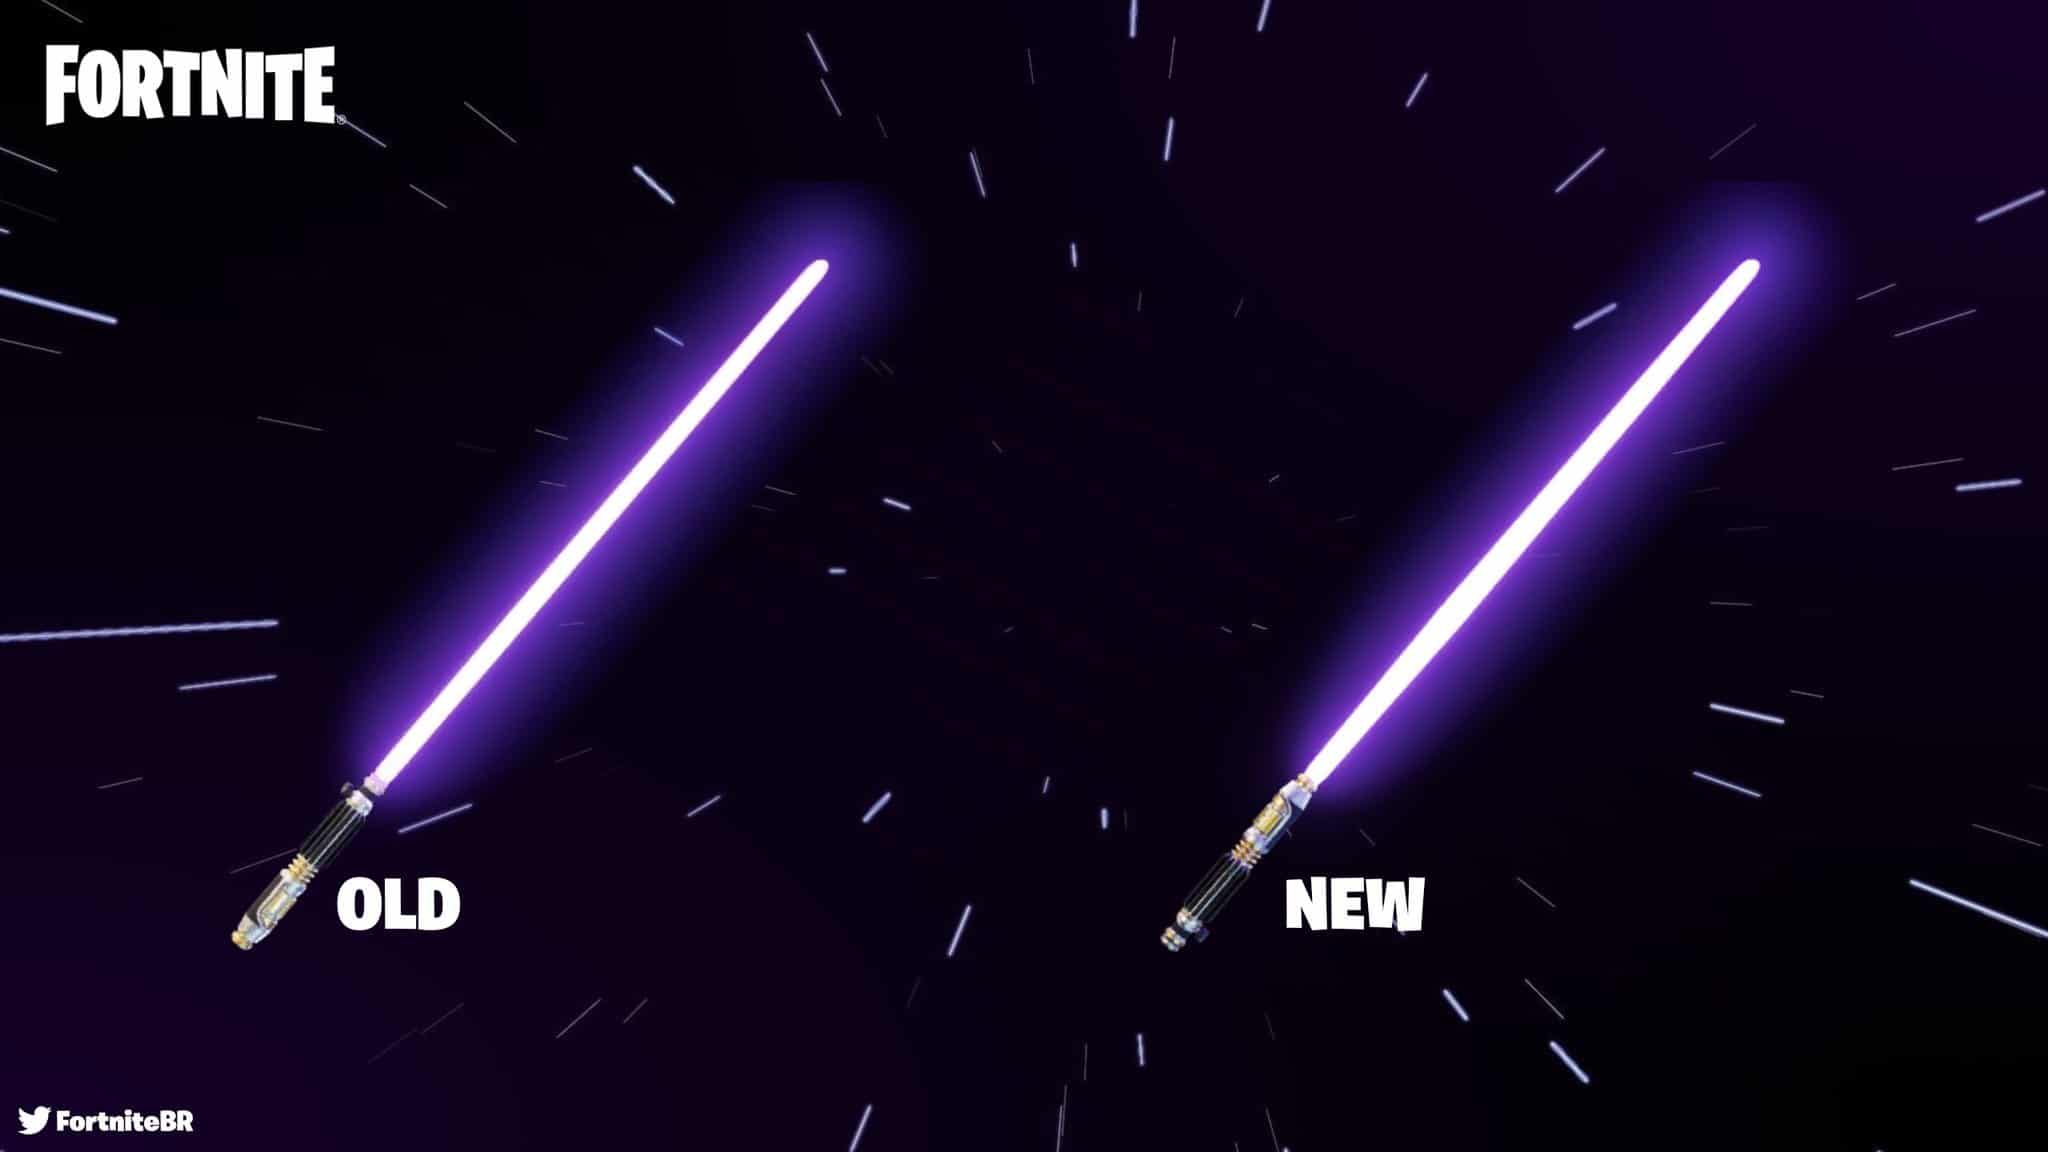 Star Wars Lightsabers weapons will return to Fortnite